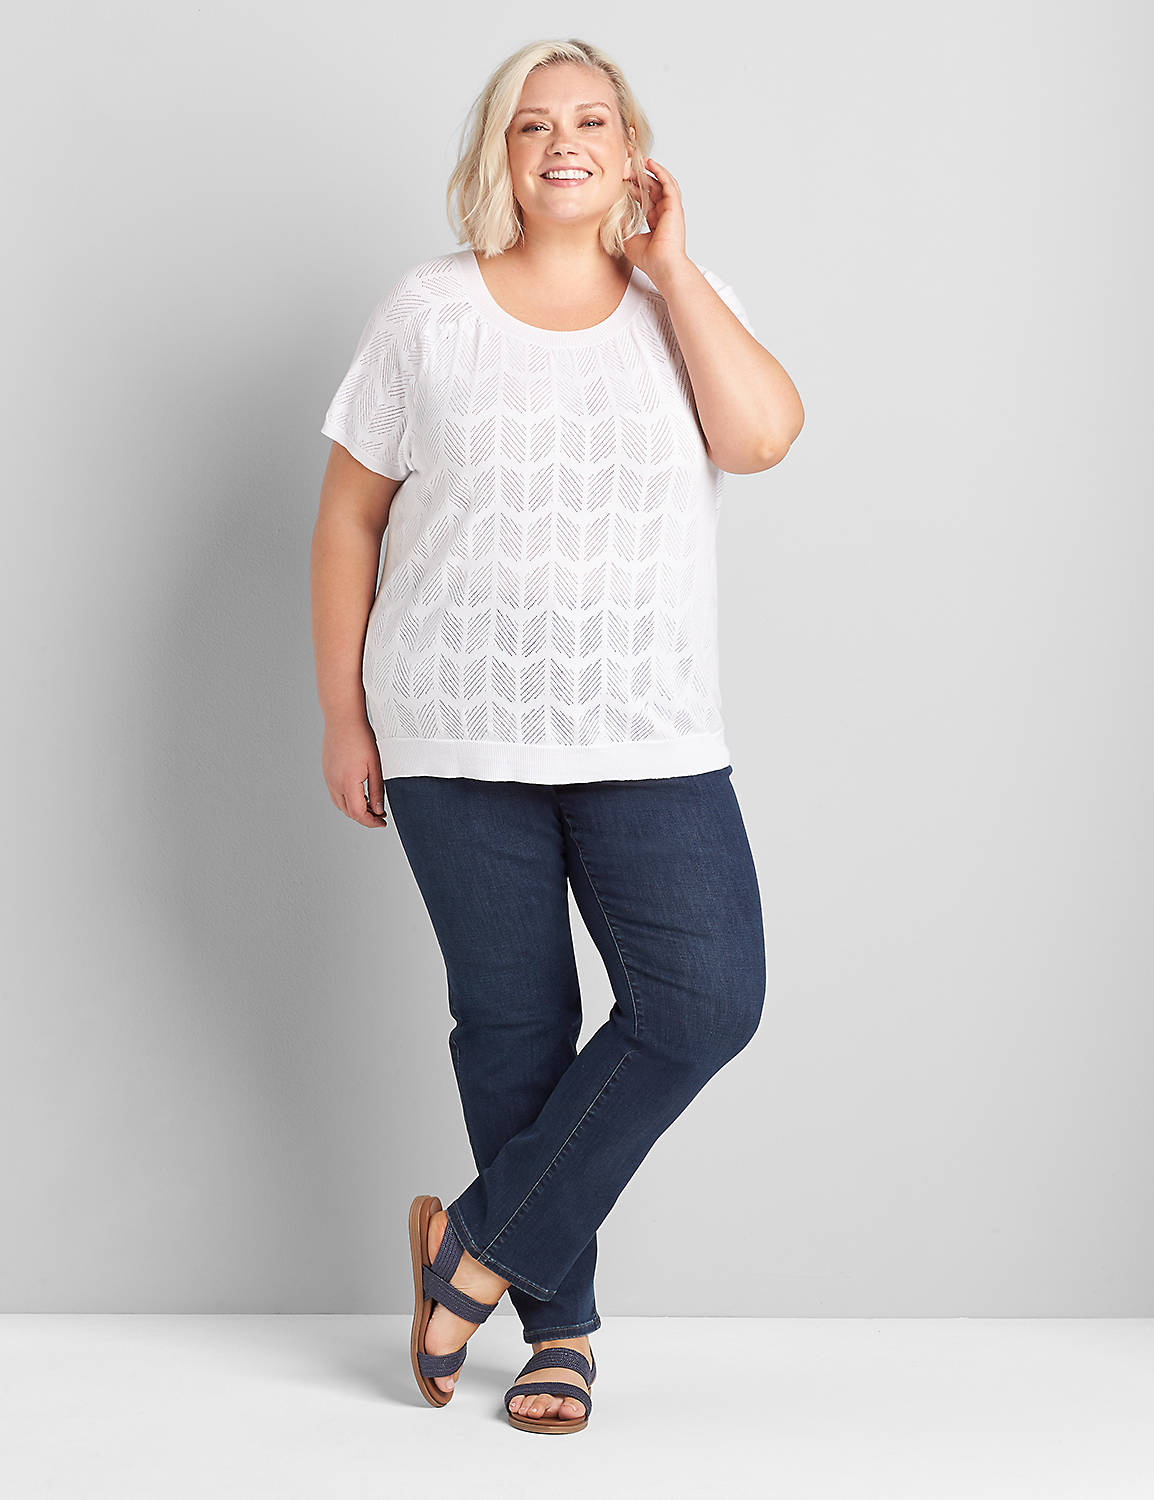 Short Sleeve Scoop Neck Raglan Pullover with Texture Stitch 1118946:Ascena White:18/20 Product Image 3